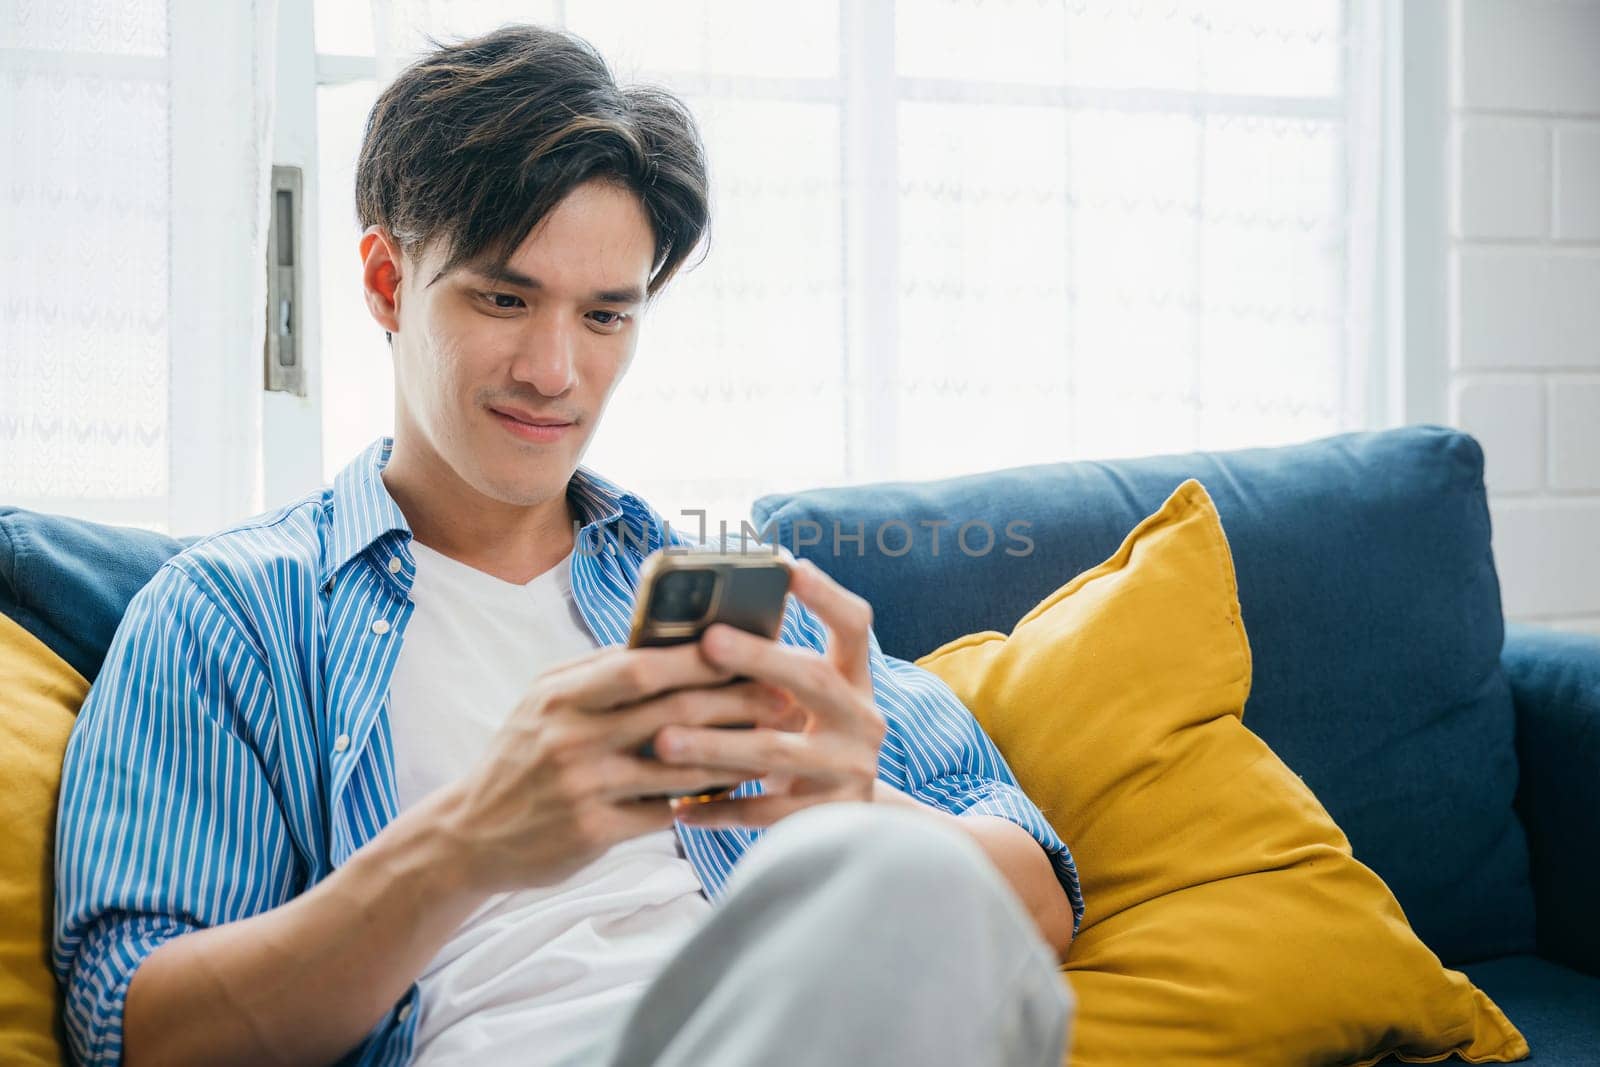 A young man smiling and talking on his phone while sitting comfortably on a sofa. Engaged in successful communication and technology he exudes happiness and relaxation. scrolling on social media.